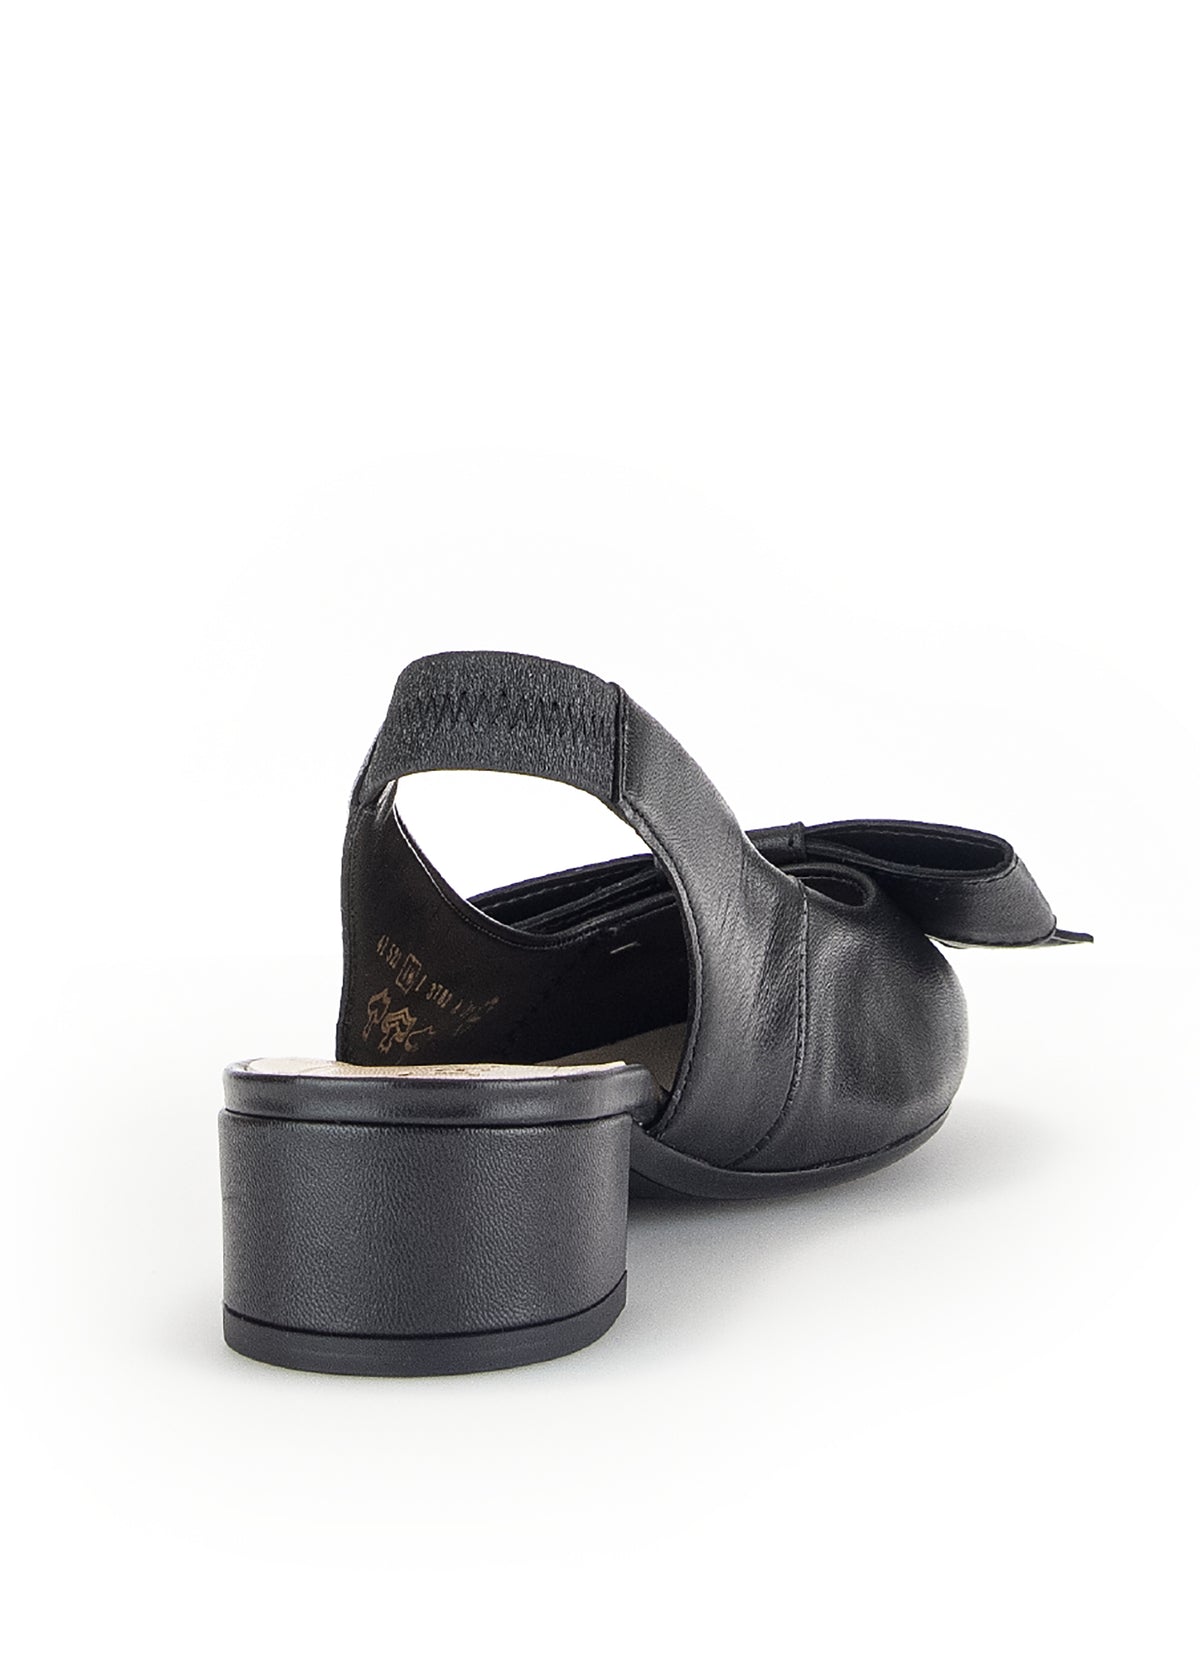 Slingback loafers - black leather, bow decoration